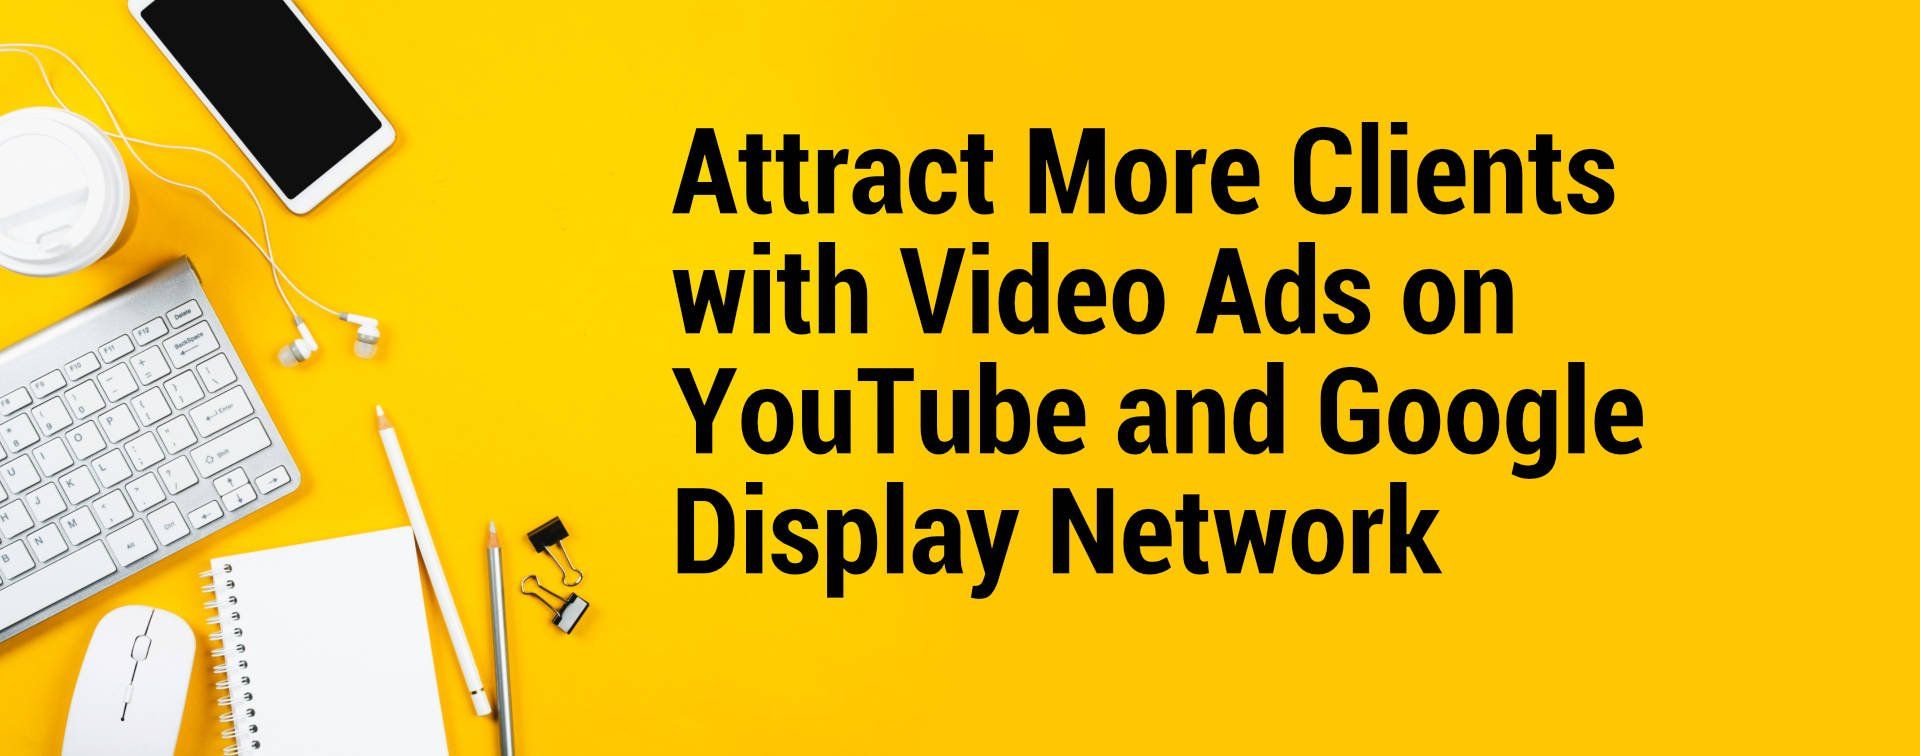 Attract More Clients with Video Ads on YouTube and Google Display Network